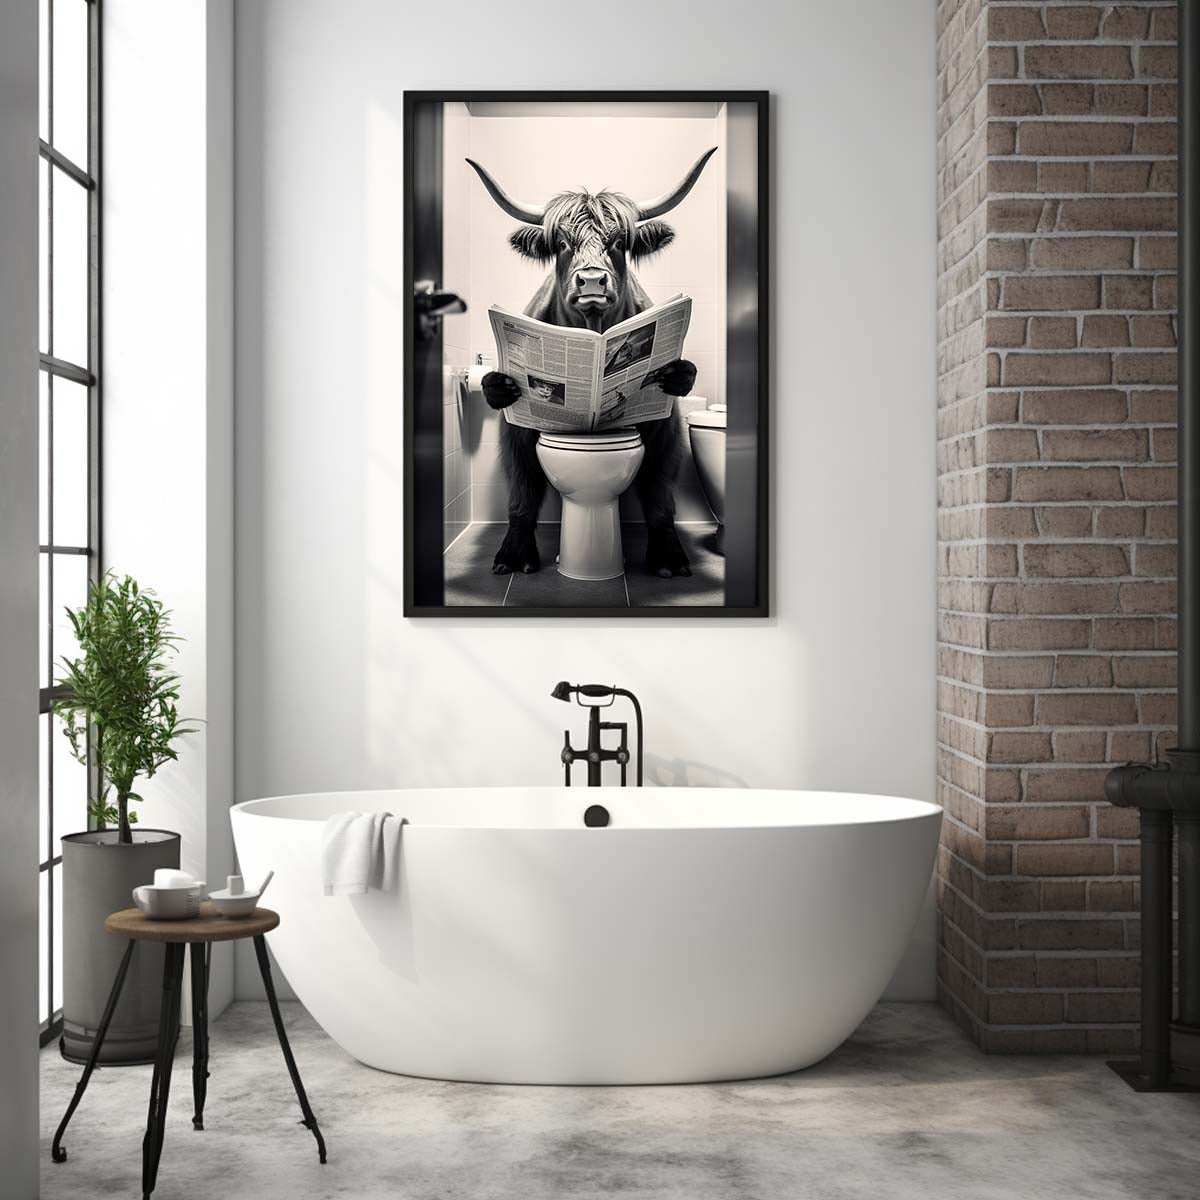 Highland Cow  Sitting on the Toilet Reading a Newspaper, Funny Bathroom Wall Decor, Funny Animal Print, Home Printables, Digital Download